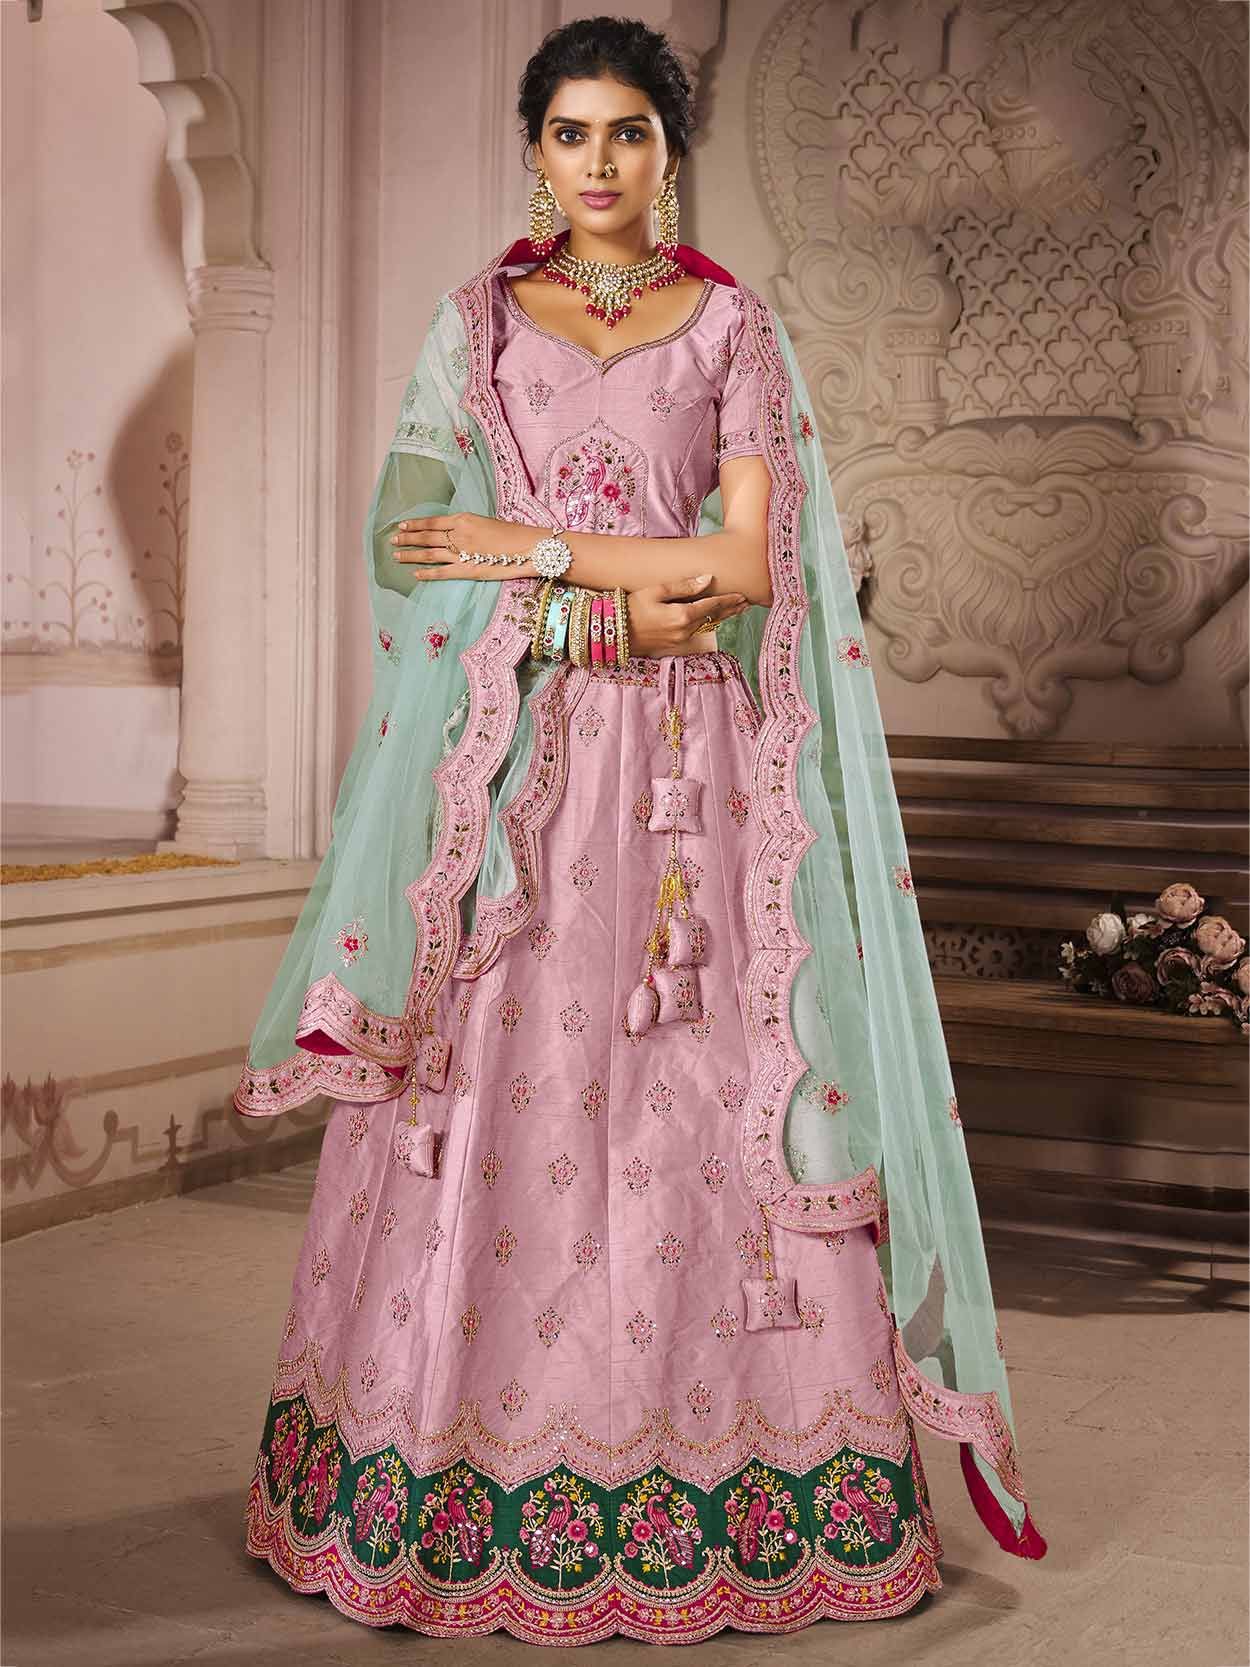 Bridal Lehenga Choli Latest Price from Manufacturers, Suppliers & Traders